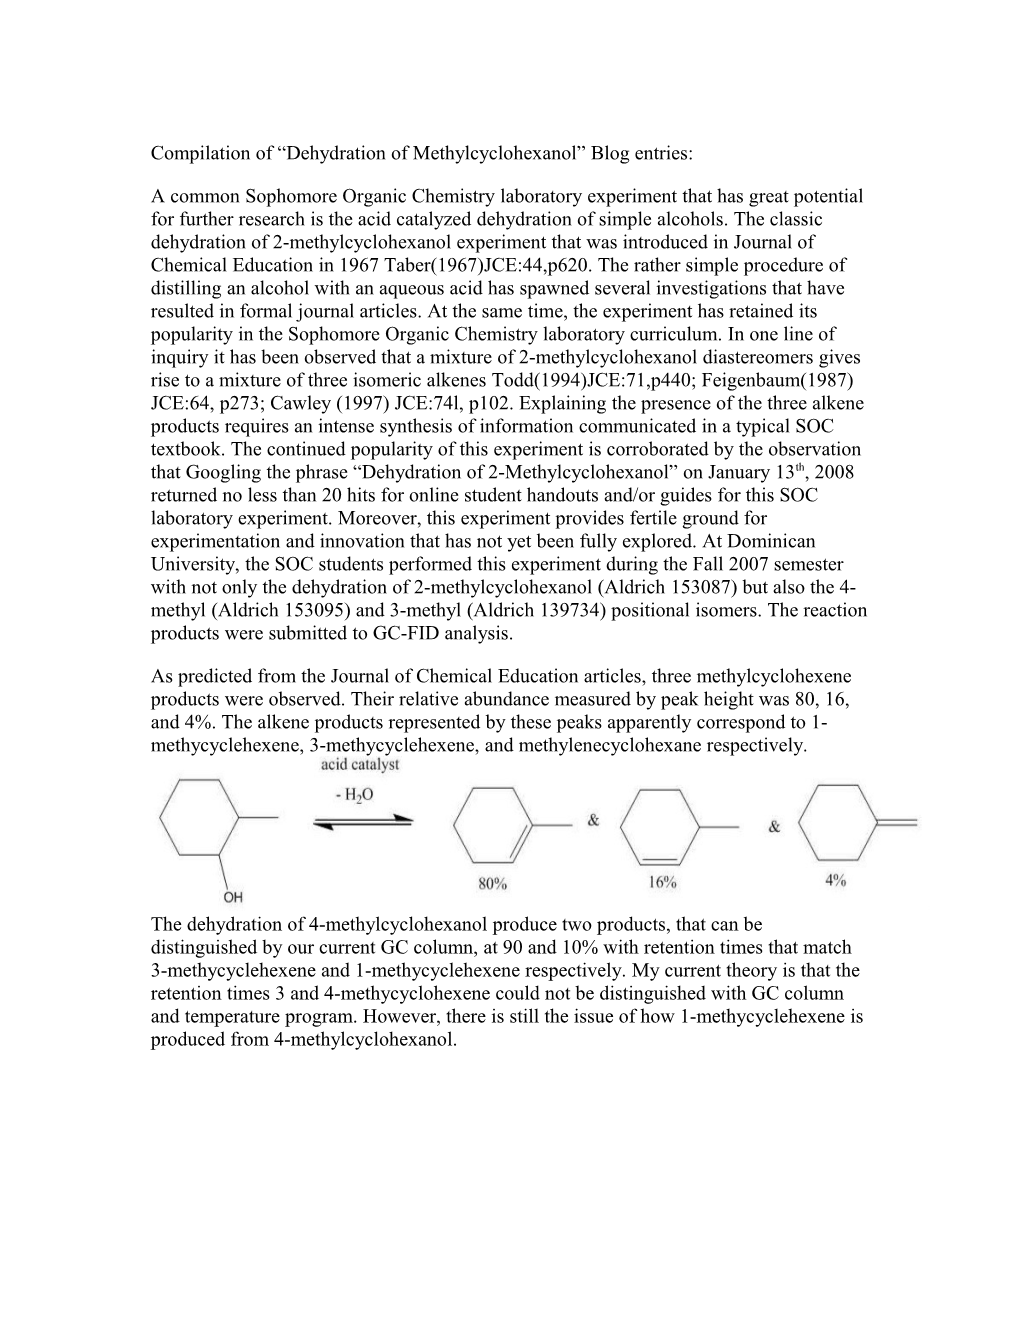 A Common Sophomore Organic Chemistry Laboratory Experiment That Has Great Potential For